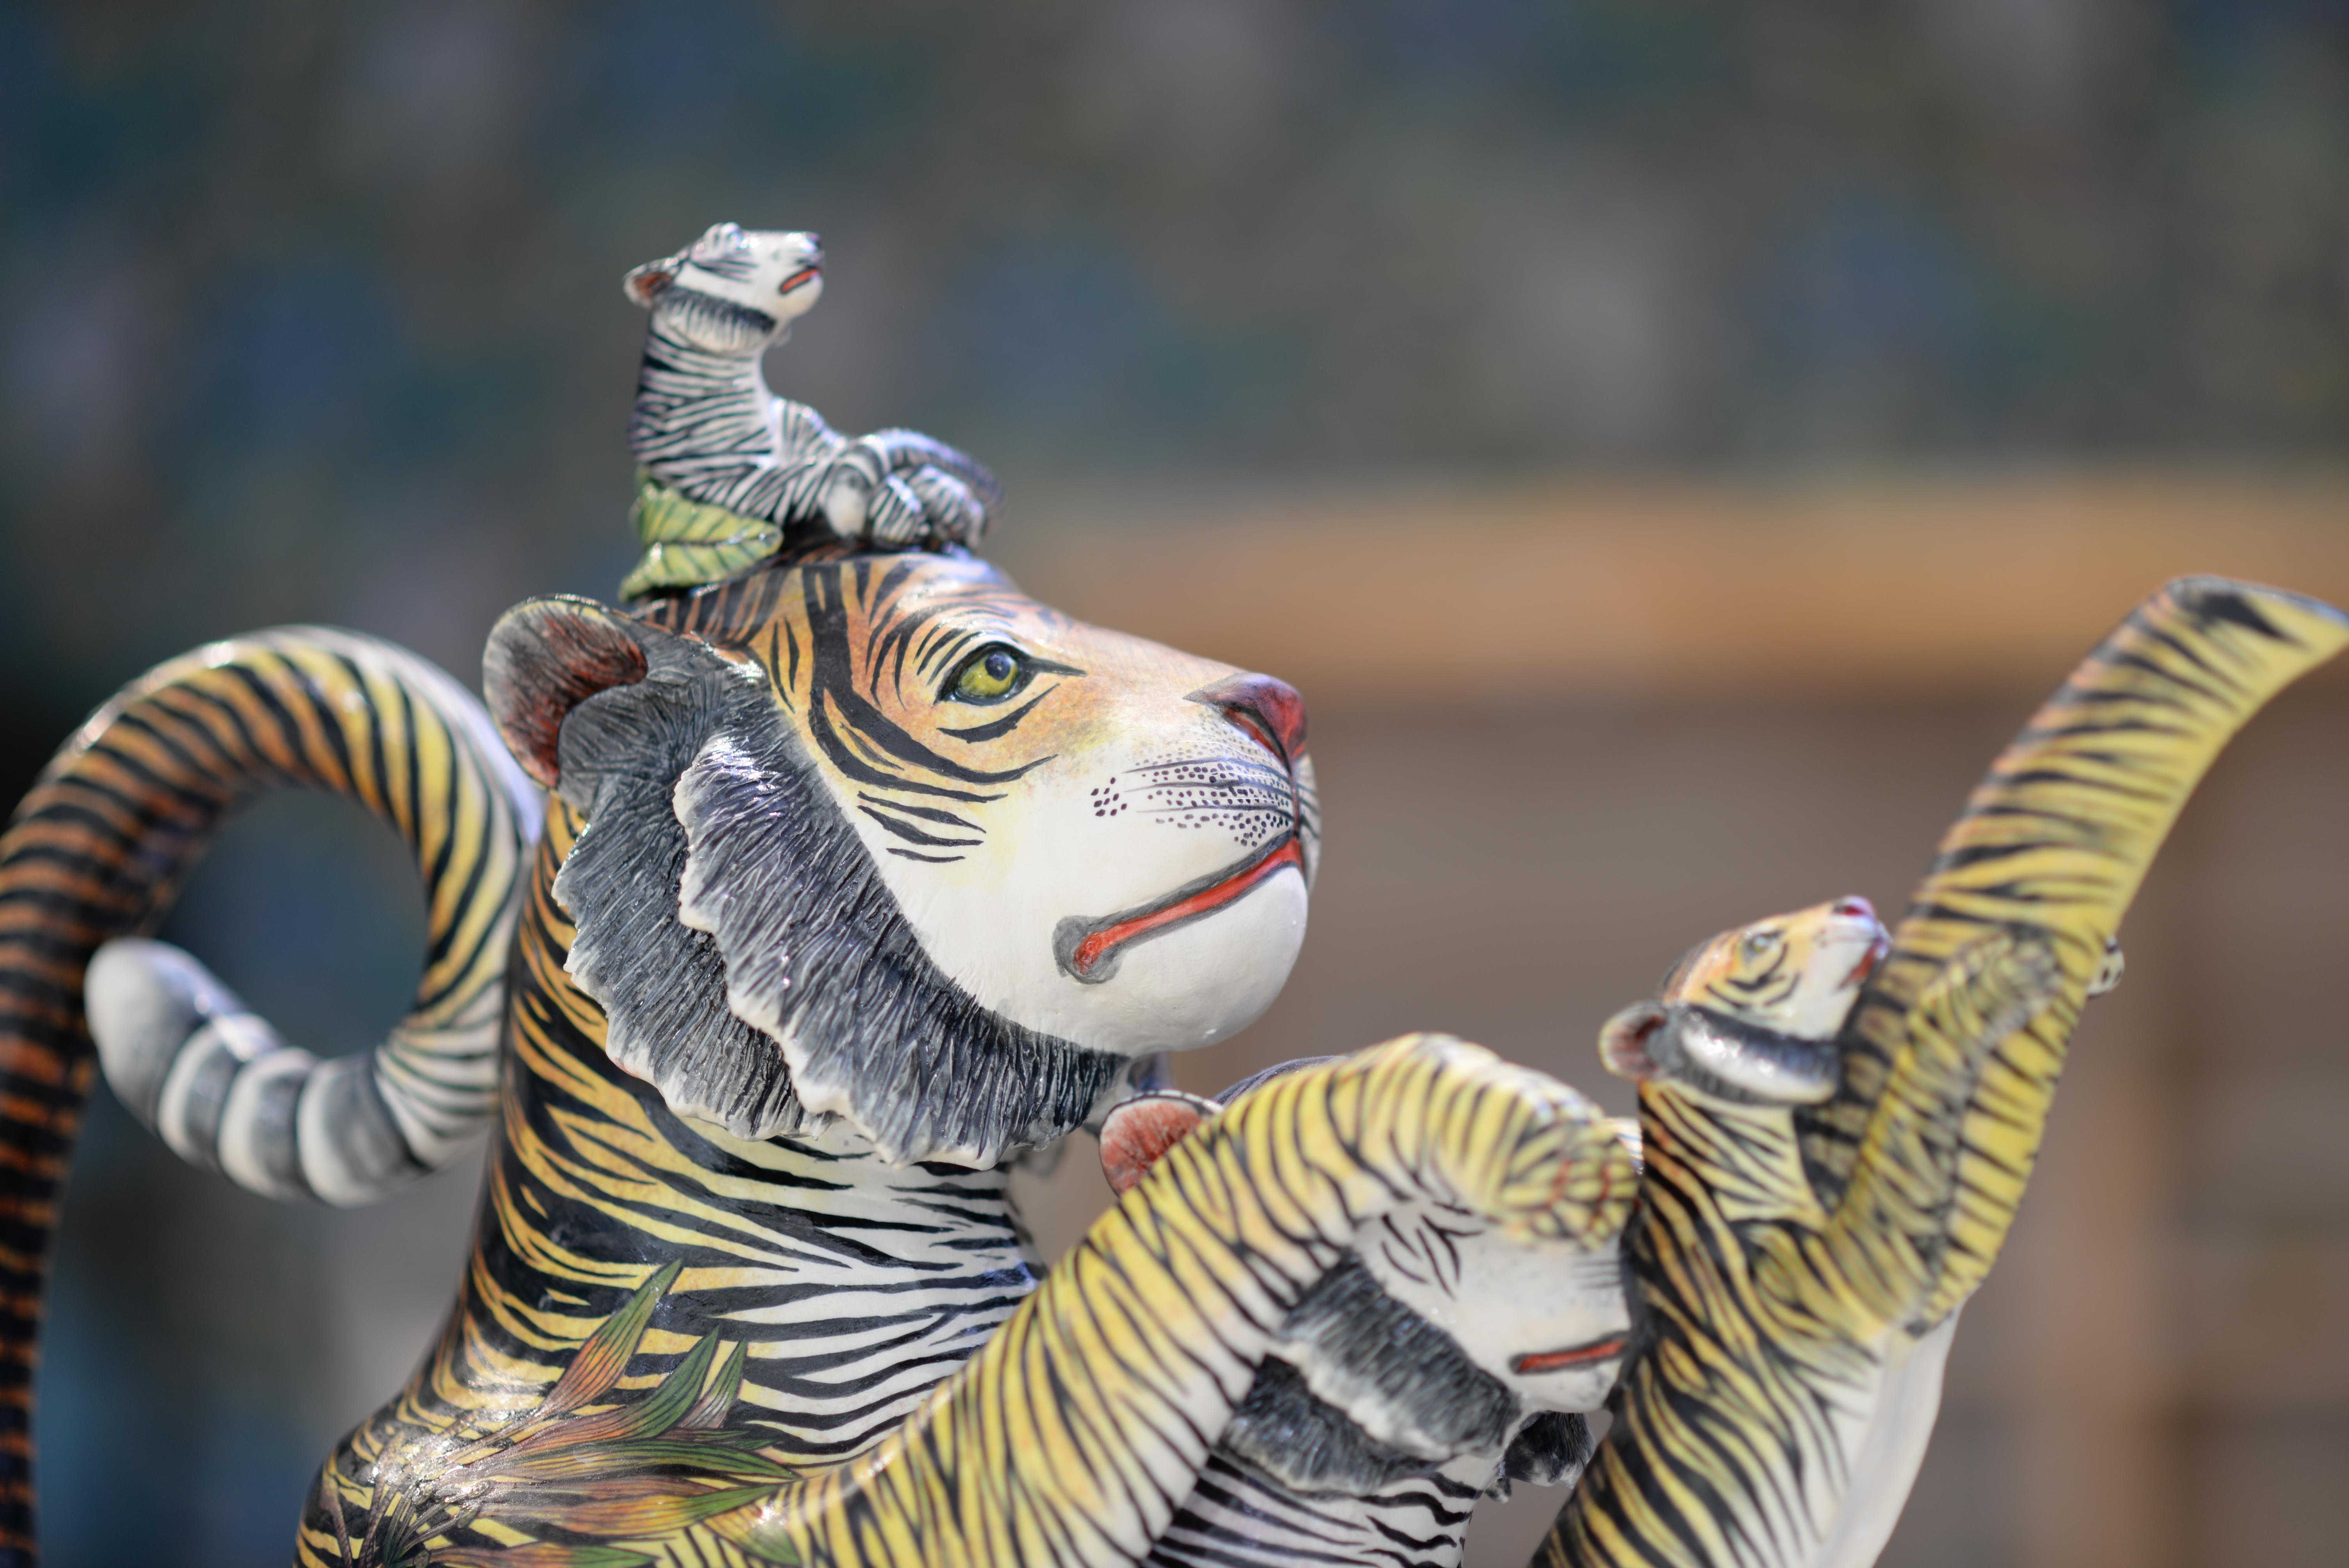 Immerse yourself in the captivating allure of the Tiger Teapot, a masterpiece of South African Ceramic Art. Crafted by the skilled hands of Sfiso Mvelase, this teapot boasts lifelike sculptural elements inspired by the majestic tiger. Alec Reddy's